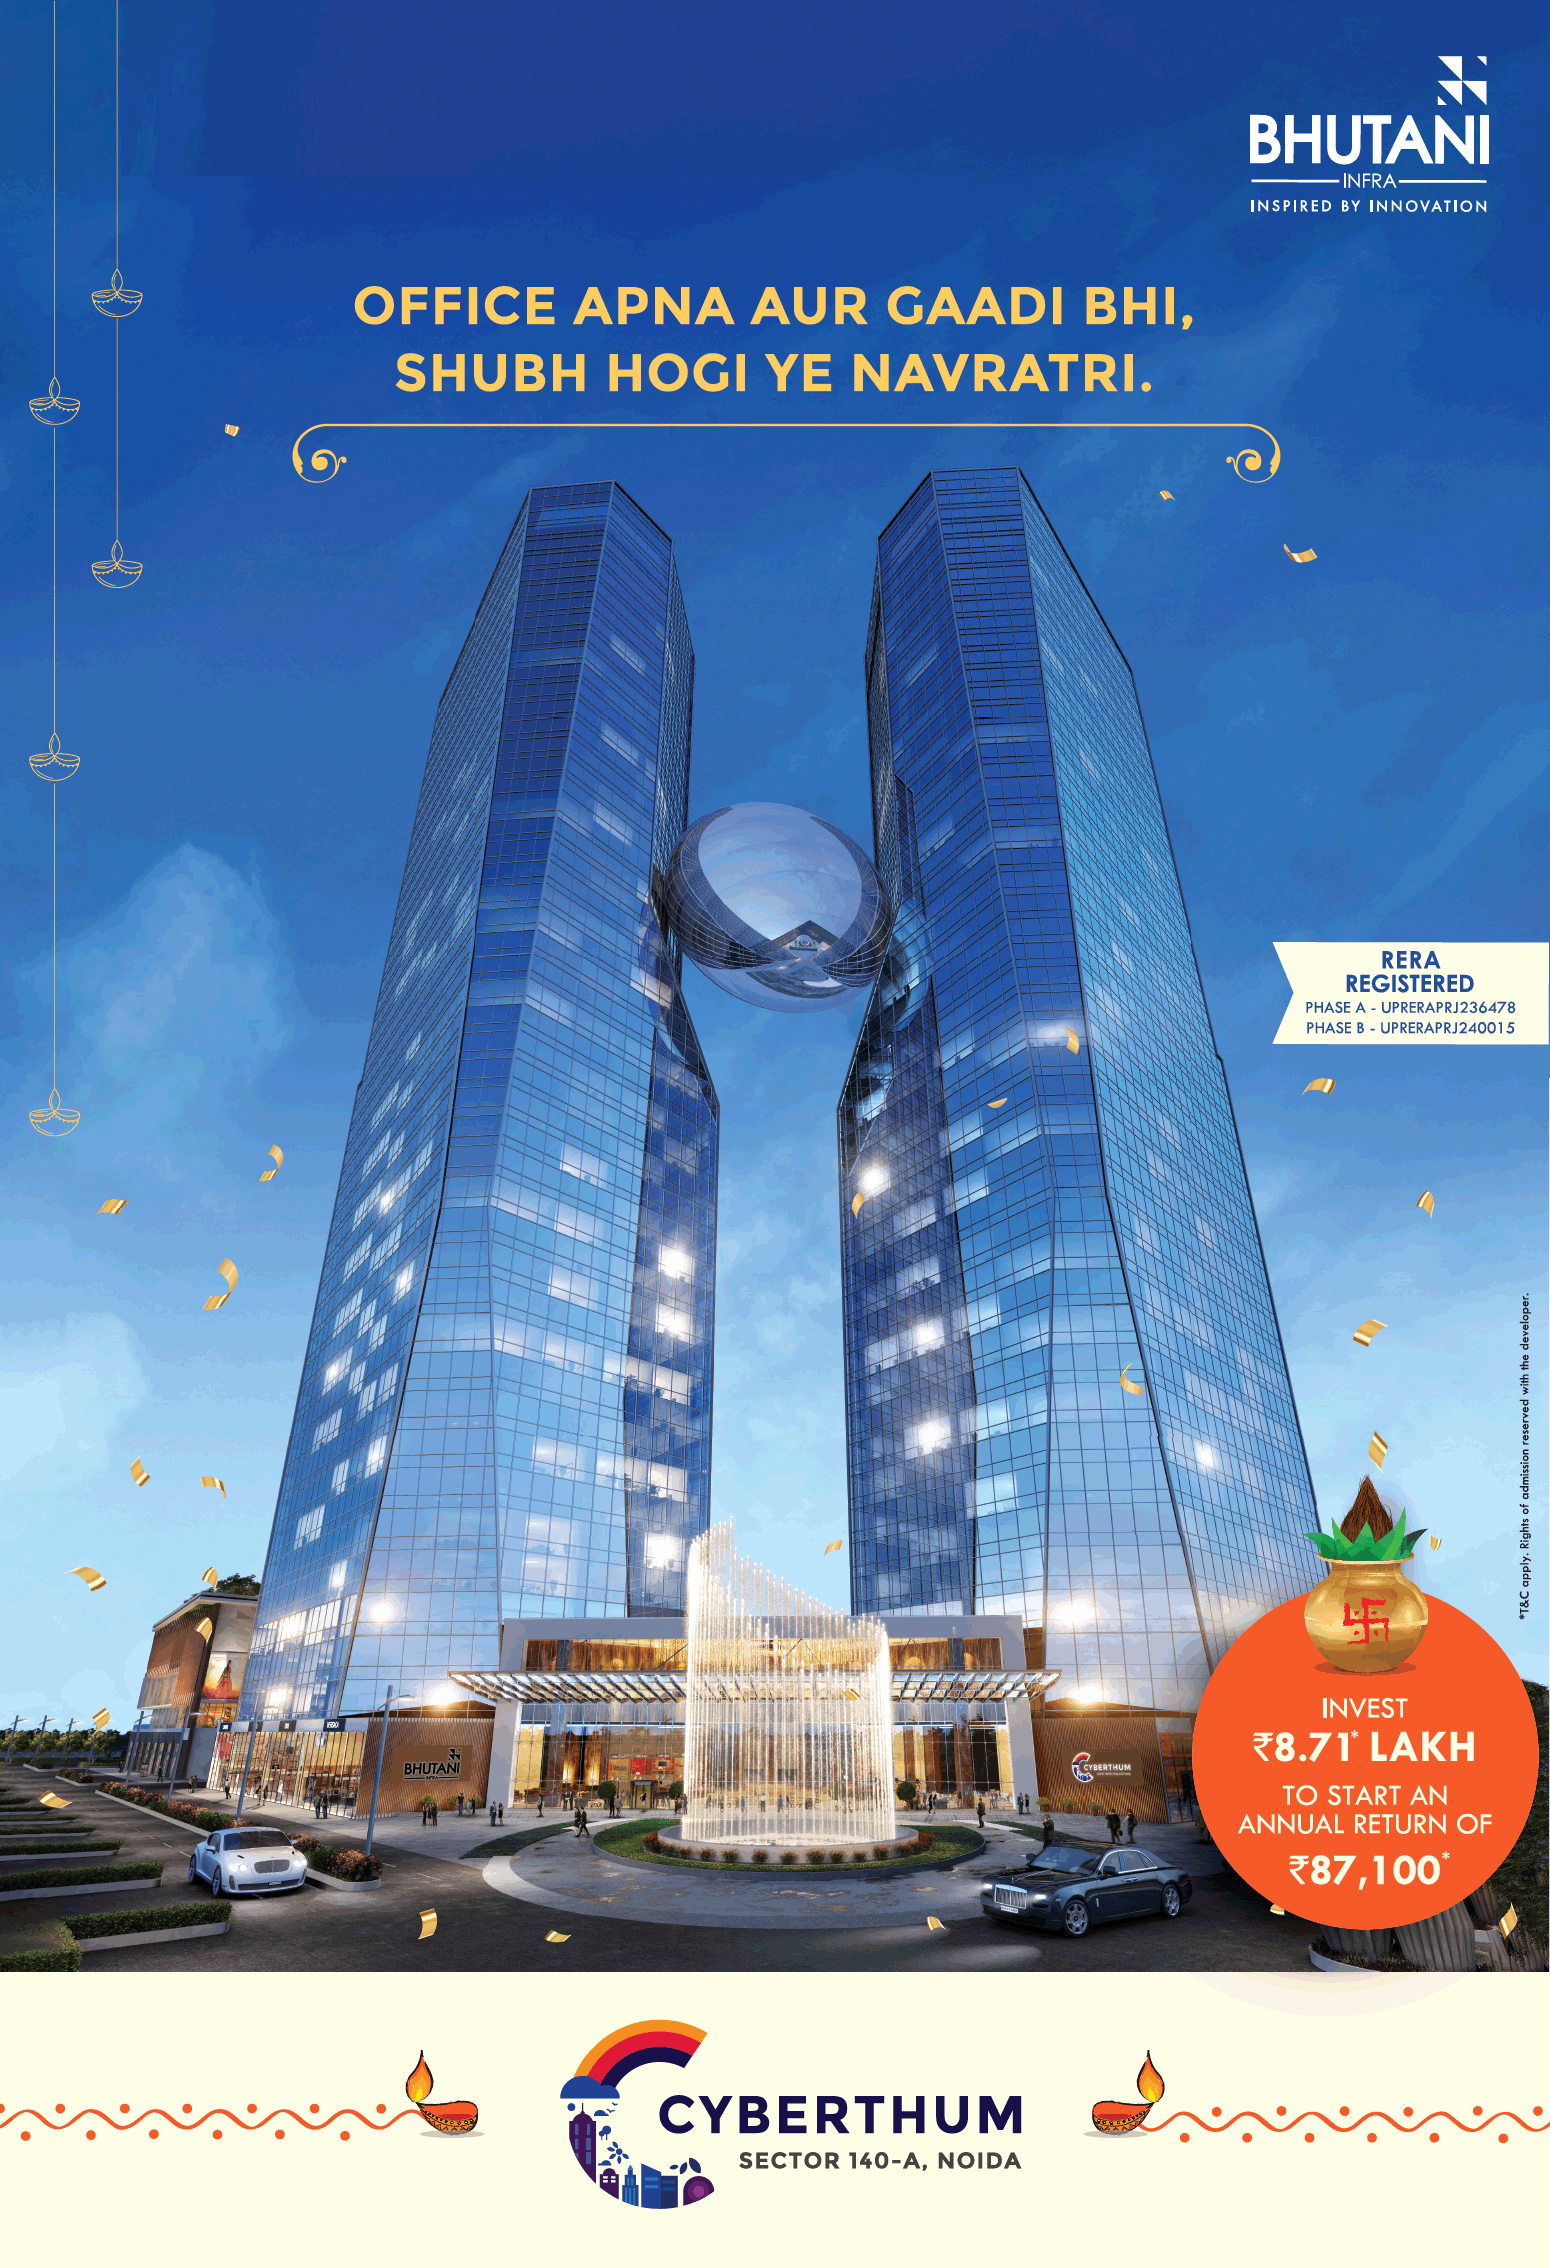 Invest in Rs. 8.71 lakhs to start an annual return of Rs. 81,700 at Bhutani Cyberthum in Noida